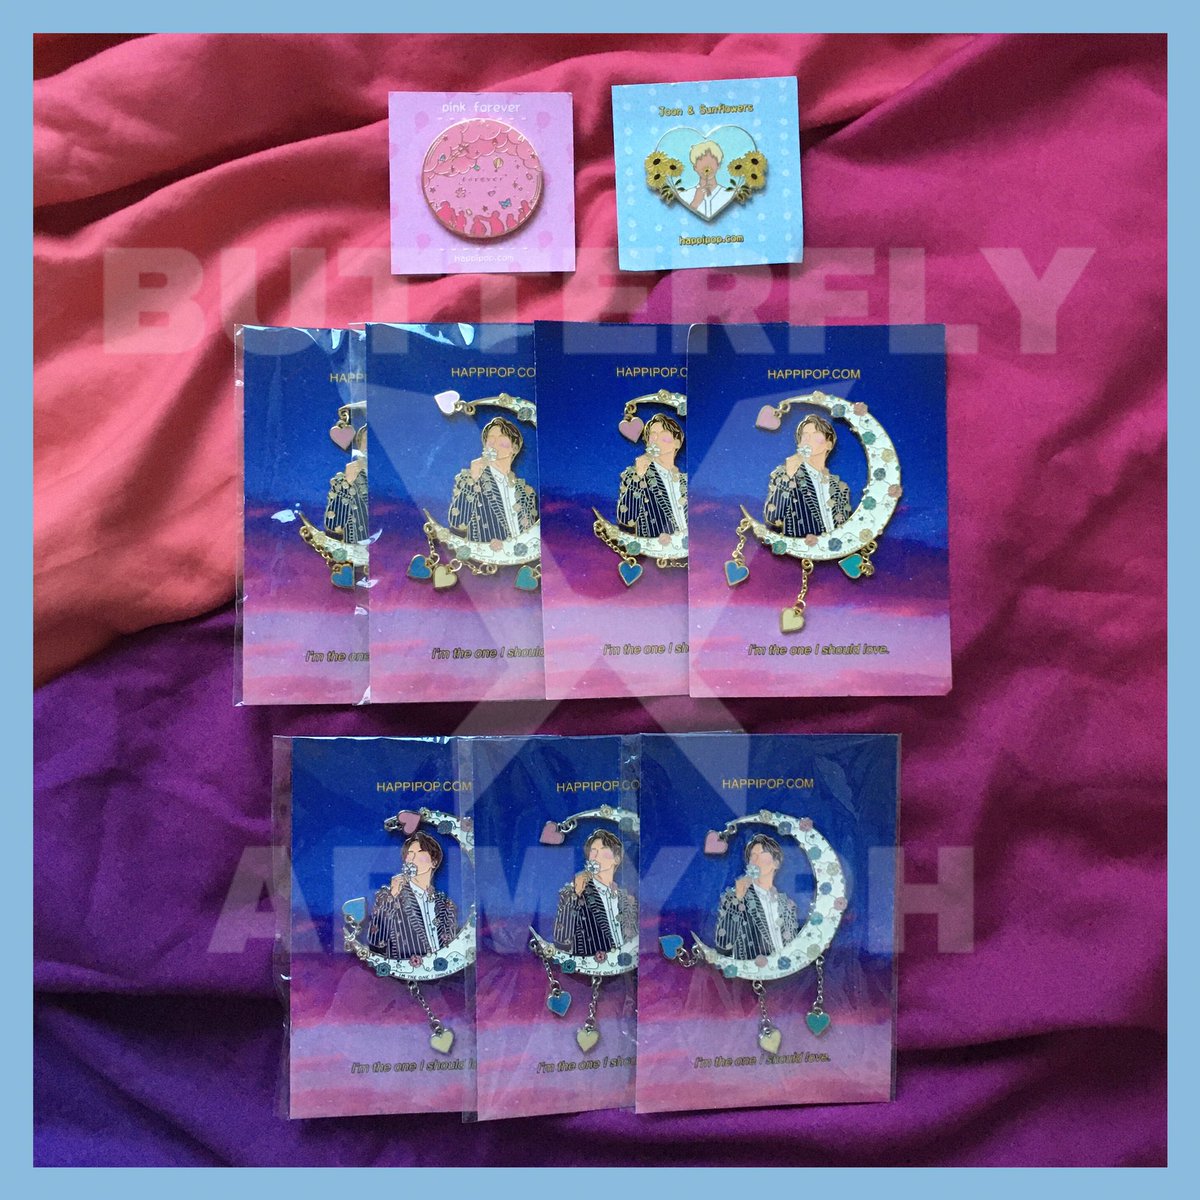  #BAPHarrival Pins from  @HAPPIPOP_twt stocksale (Batch 2) arrived safely! [Repost | Arrived: 200113]